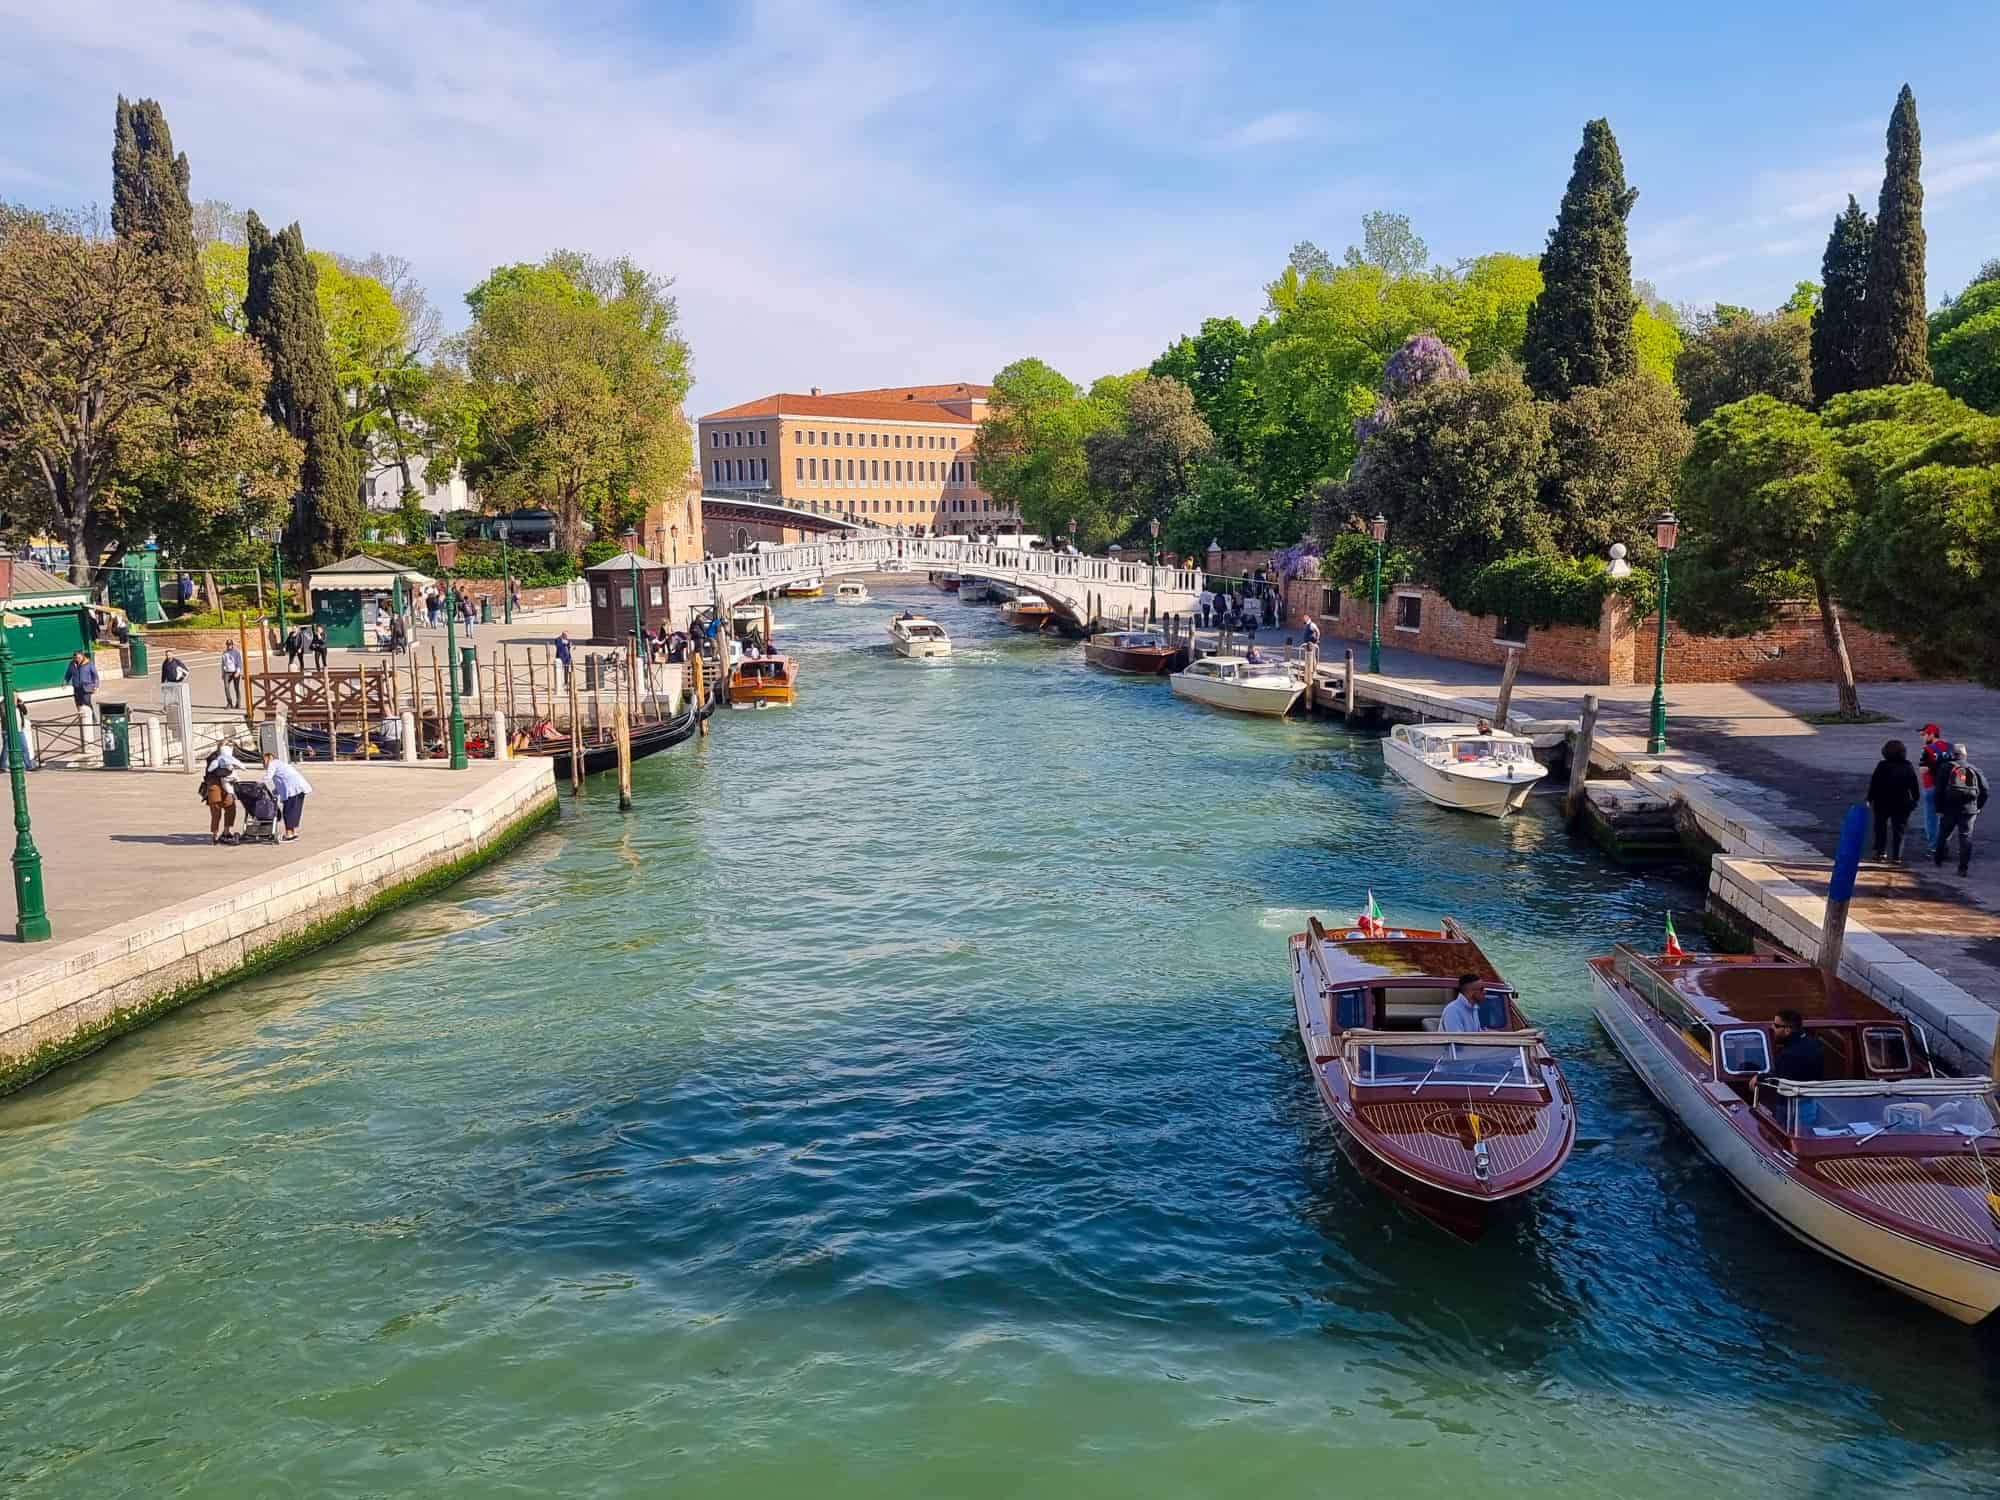 The canals of venice are a must when visiting Venice in november